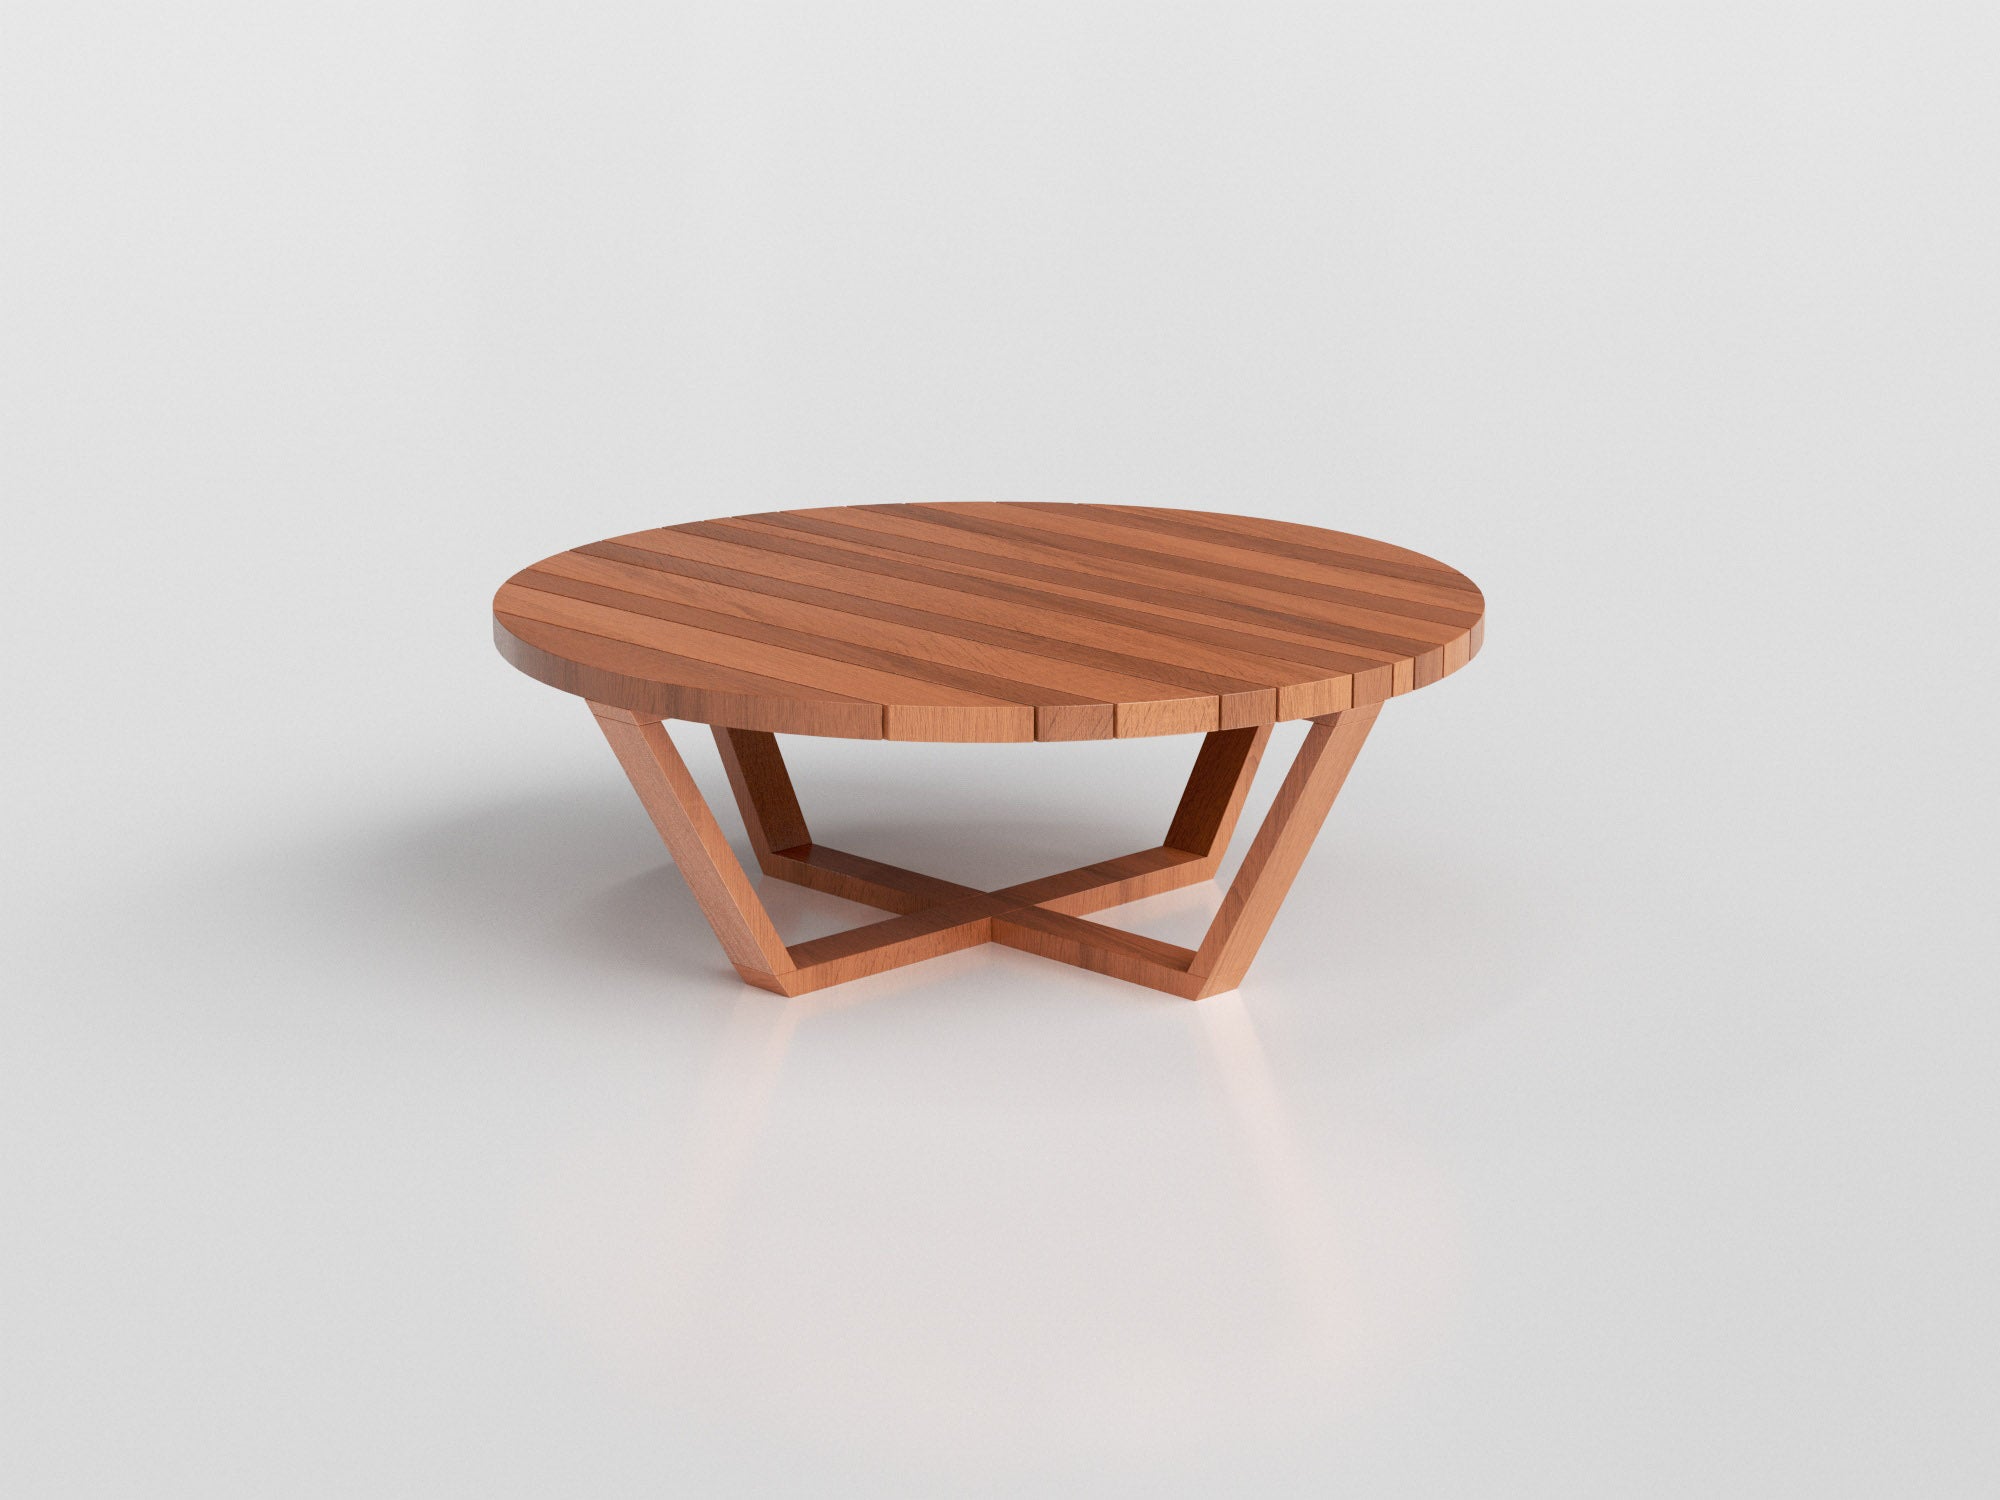 Fusion Round Coffee Table Standard with wood estruture and top for outdoor areas, designed by Maria Candida Machado